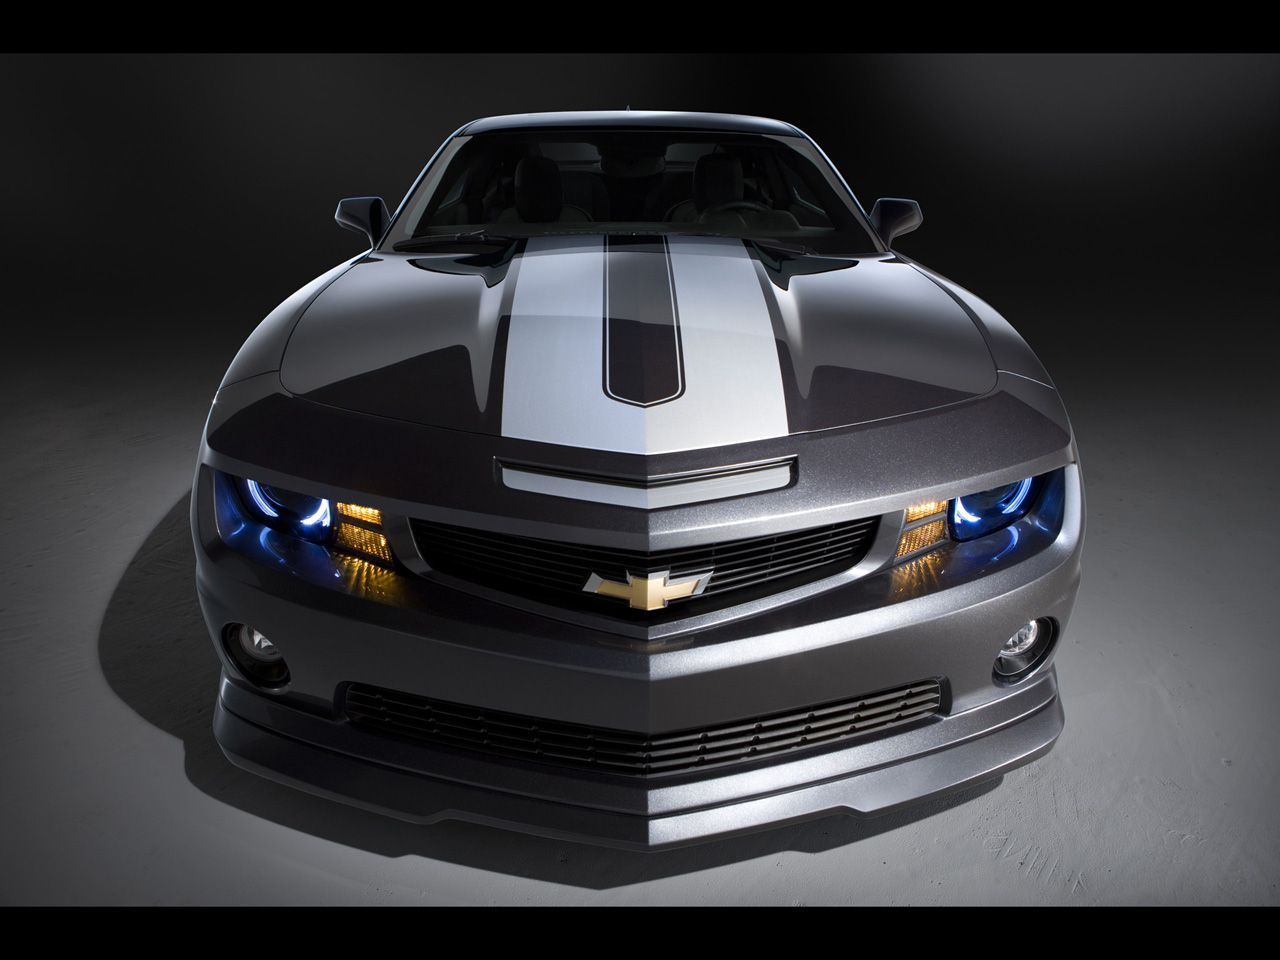 Awesome Chevrolet Camaro Wallpaper Full HD Pictures